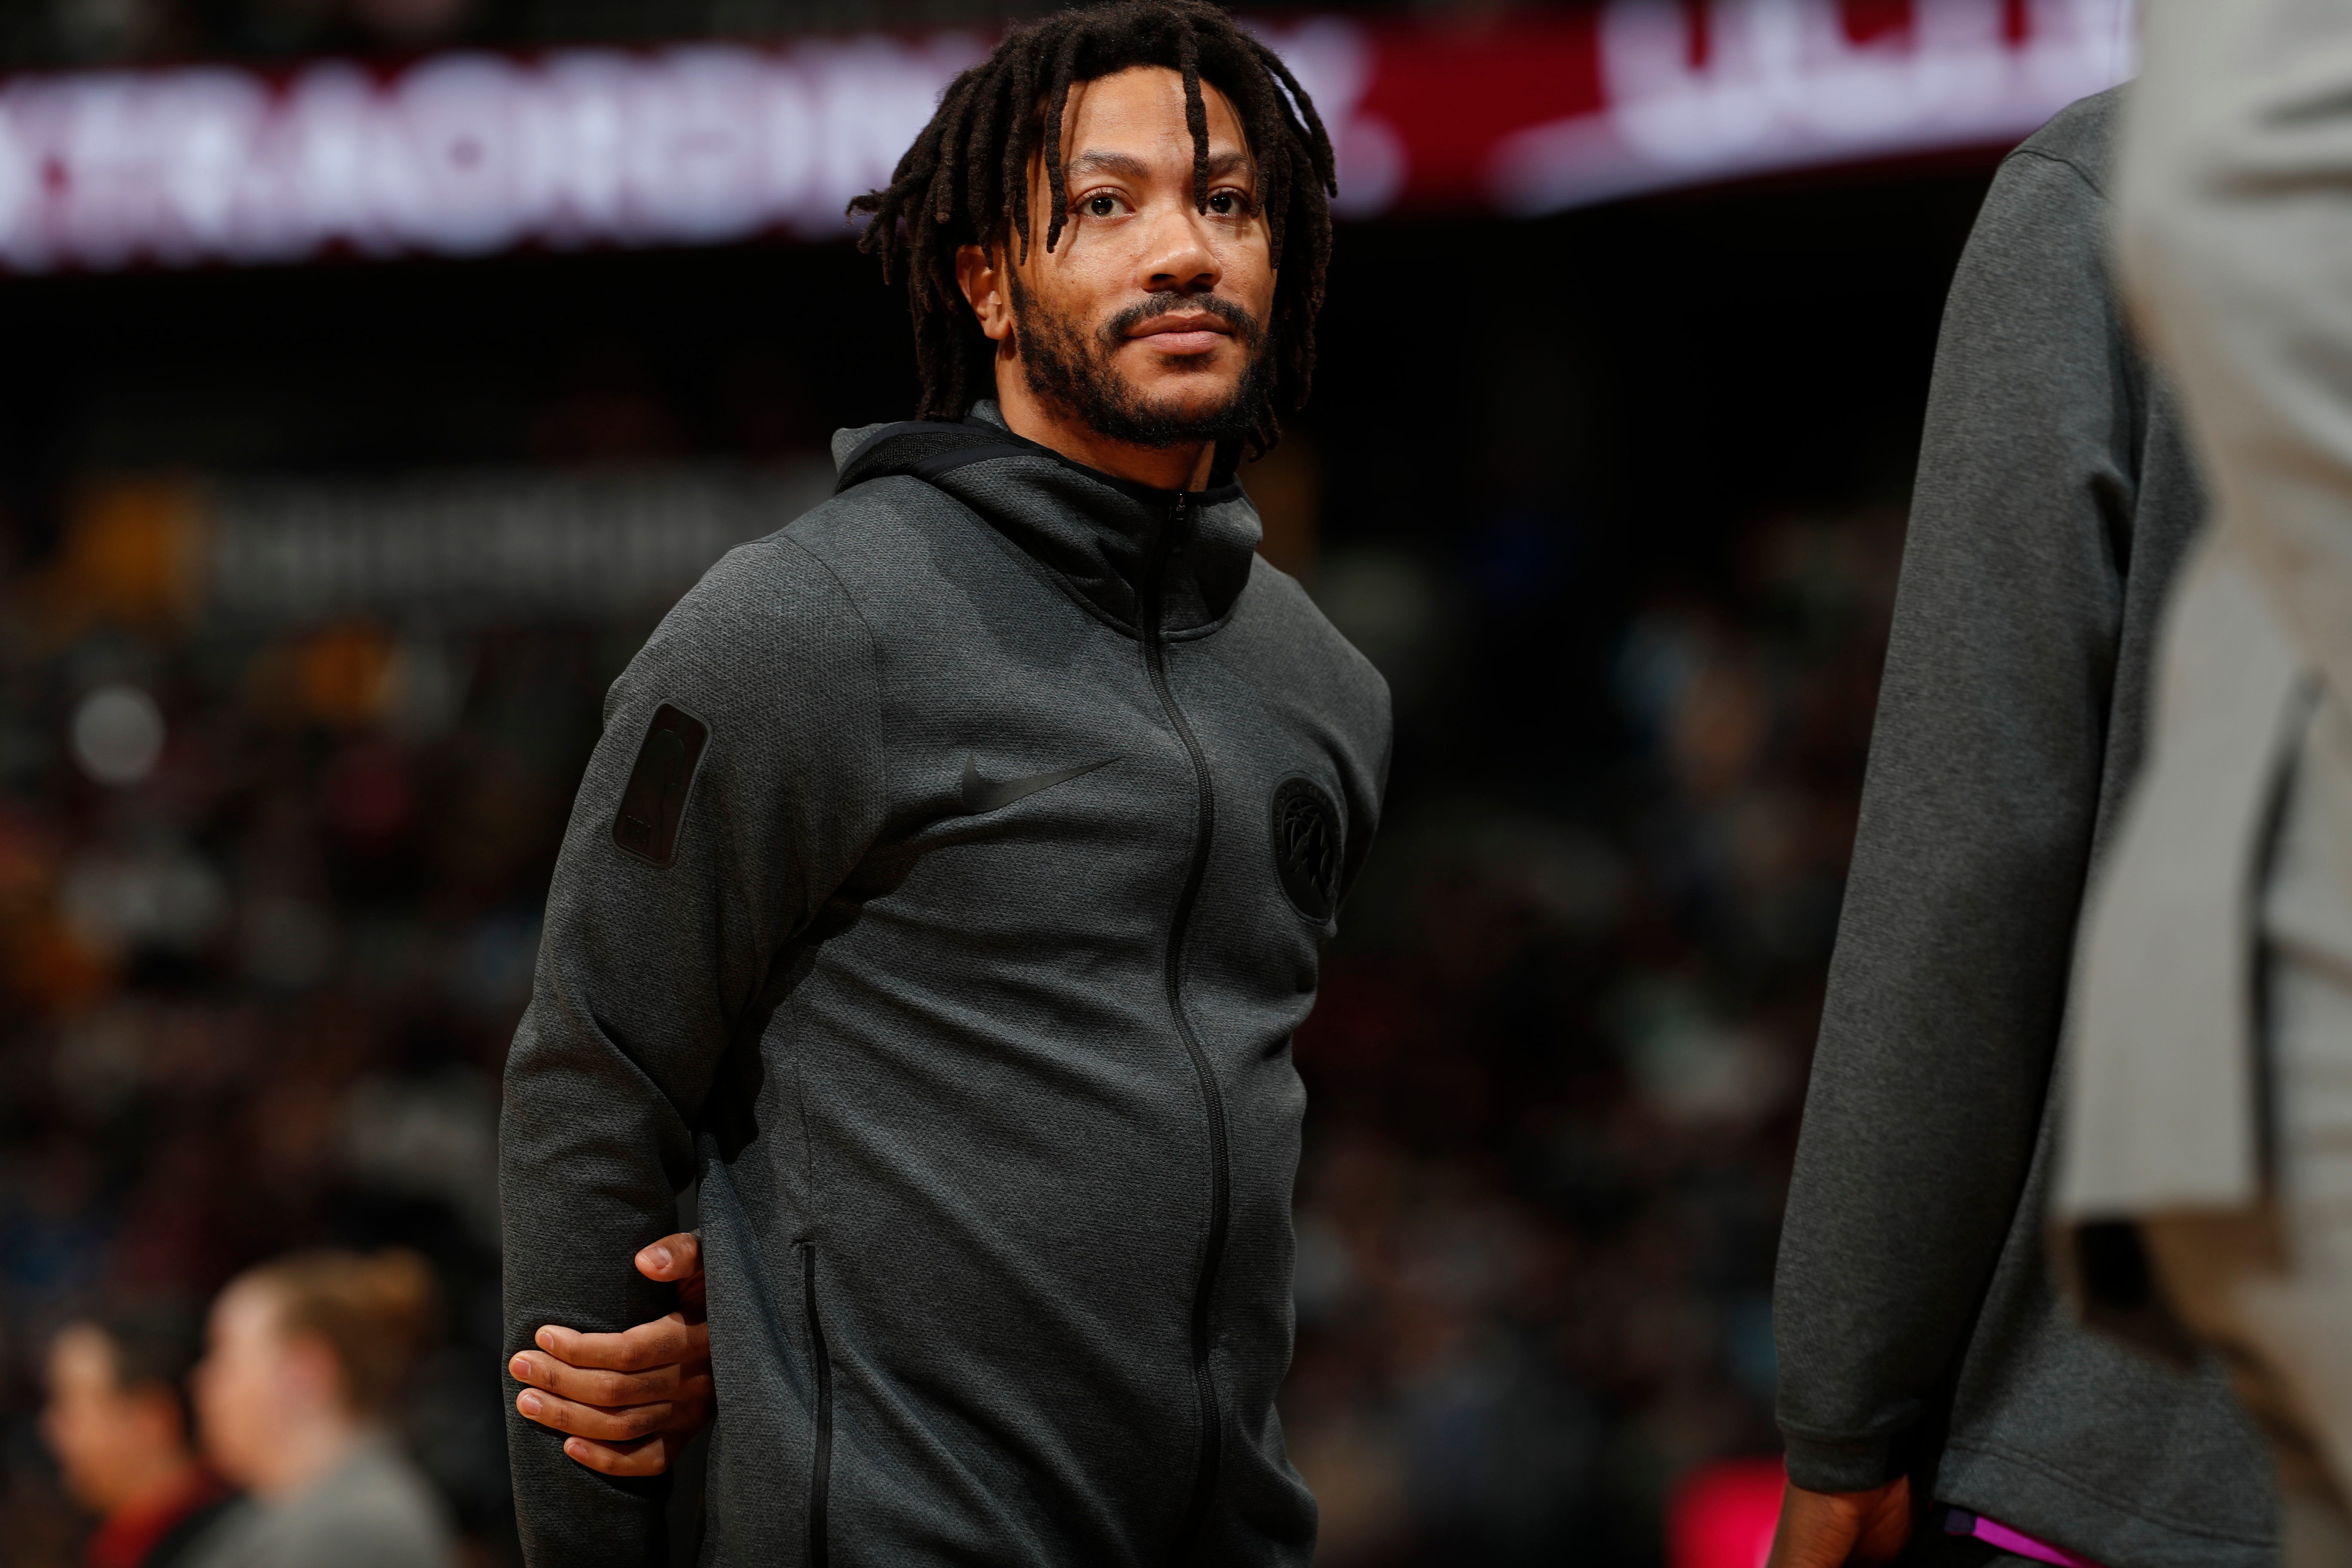 6. PG Derrick Rose, age 30: There is significant optimism around the Pistons’ biggest acquisition in free agency. Rose comes in at a very reasonable two years and $15 million, and if he’s anything like he was last season with the Timberwolves, he could provide a scoring spark for the second unit and possibly could be finishing games. Injuries are a constant question mark but the Pistons are taking a low-risk gamble.